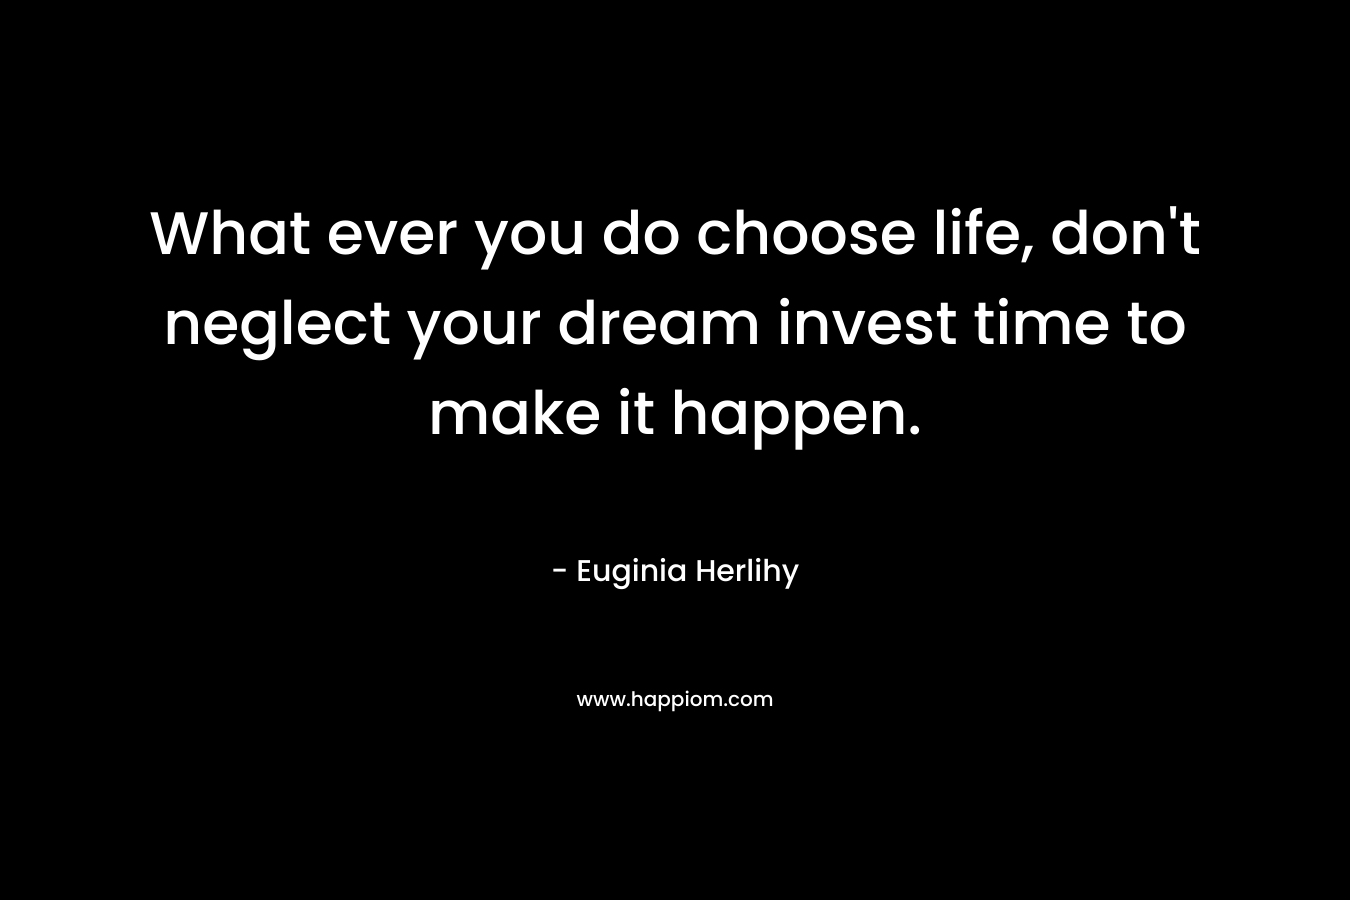 What ever you do choose life, don't neglect your dream invest time to make it happen.